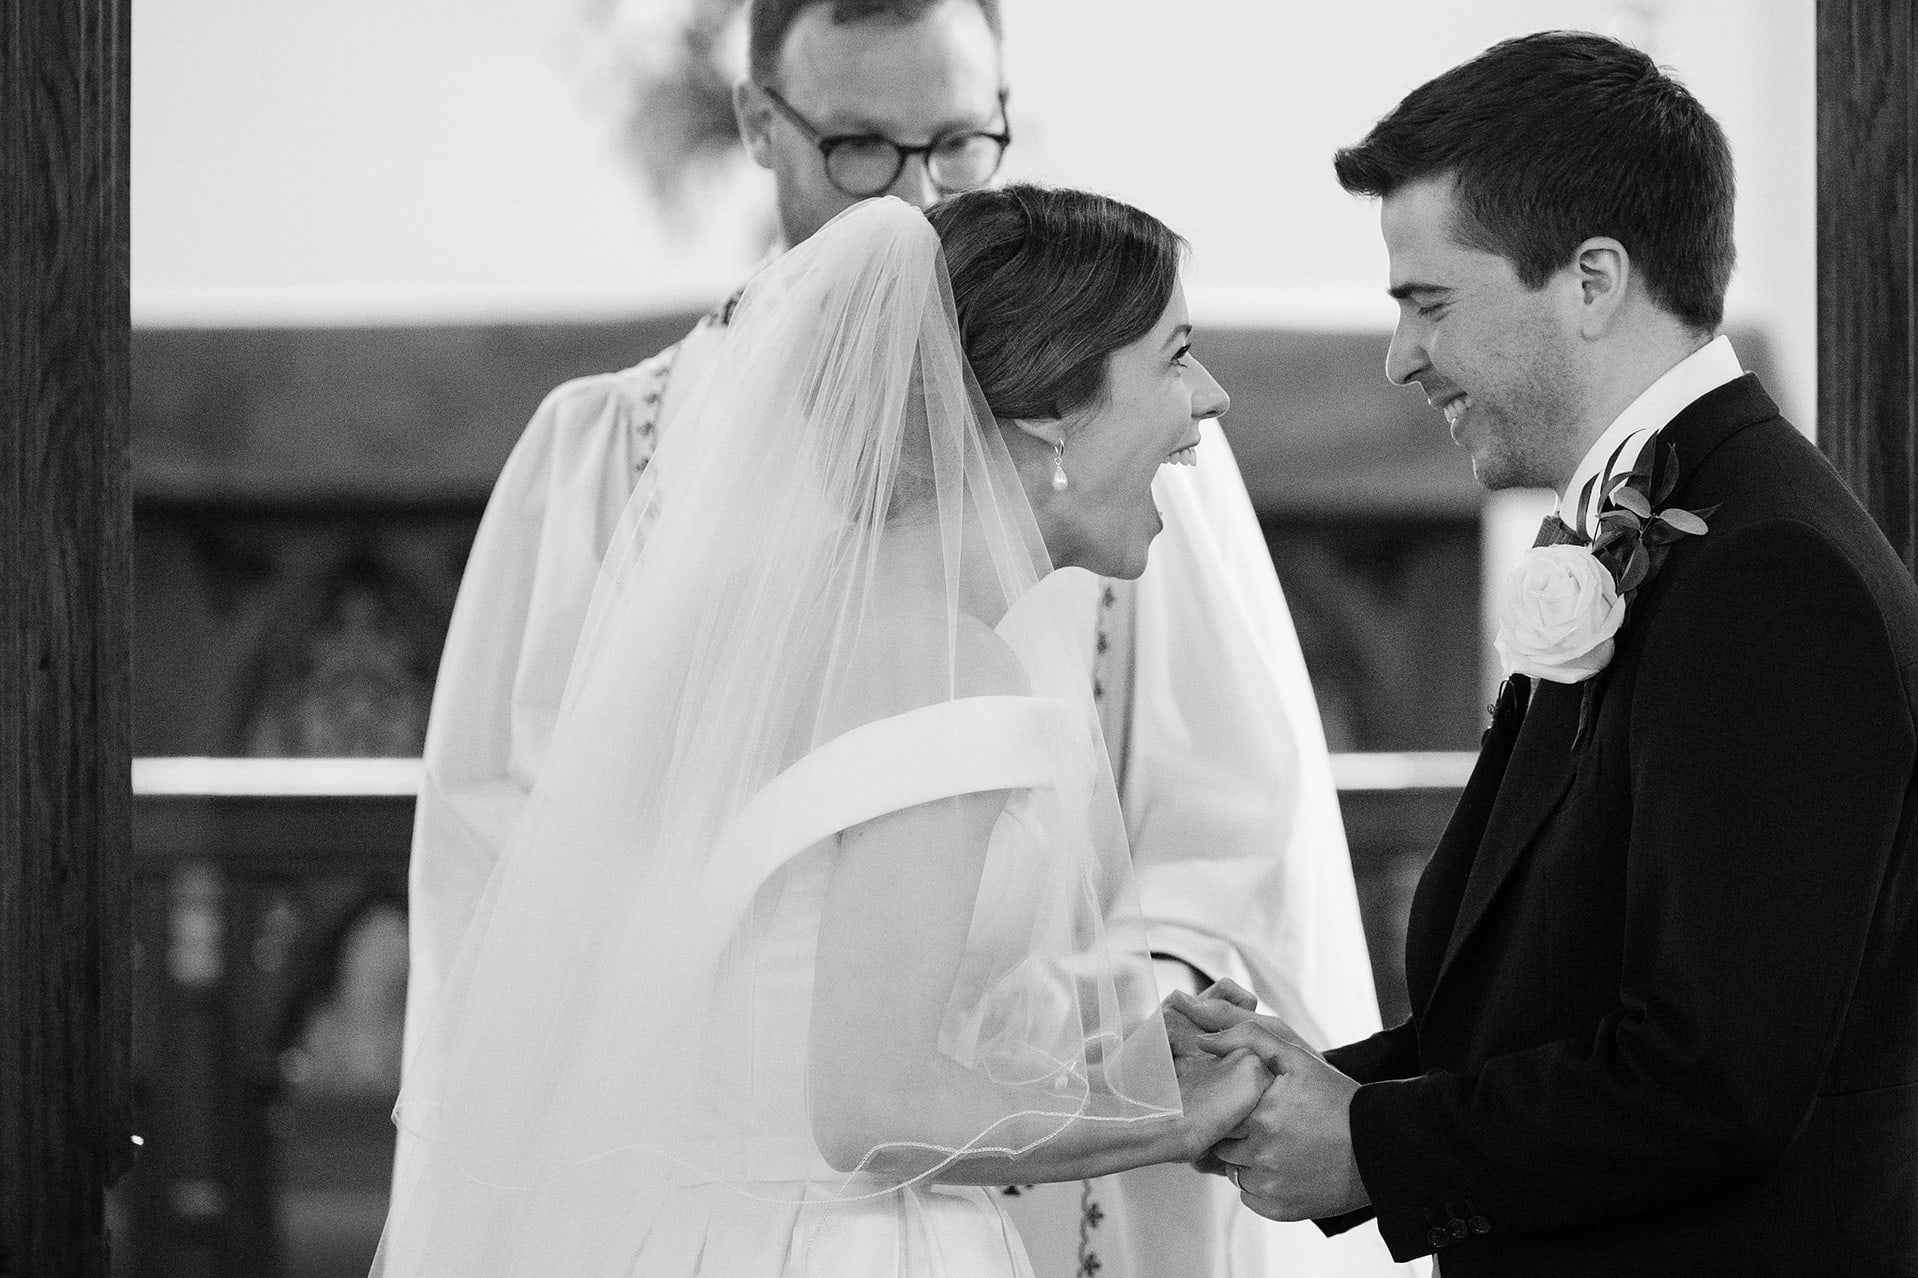 Bride with her mouth agape in delight at being pronounced husband and wife